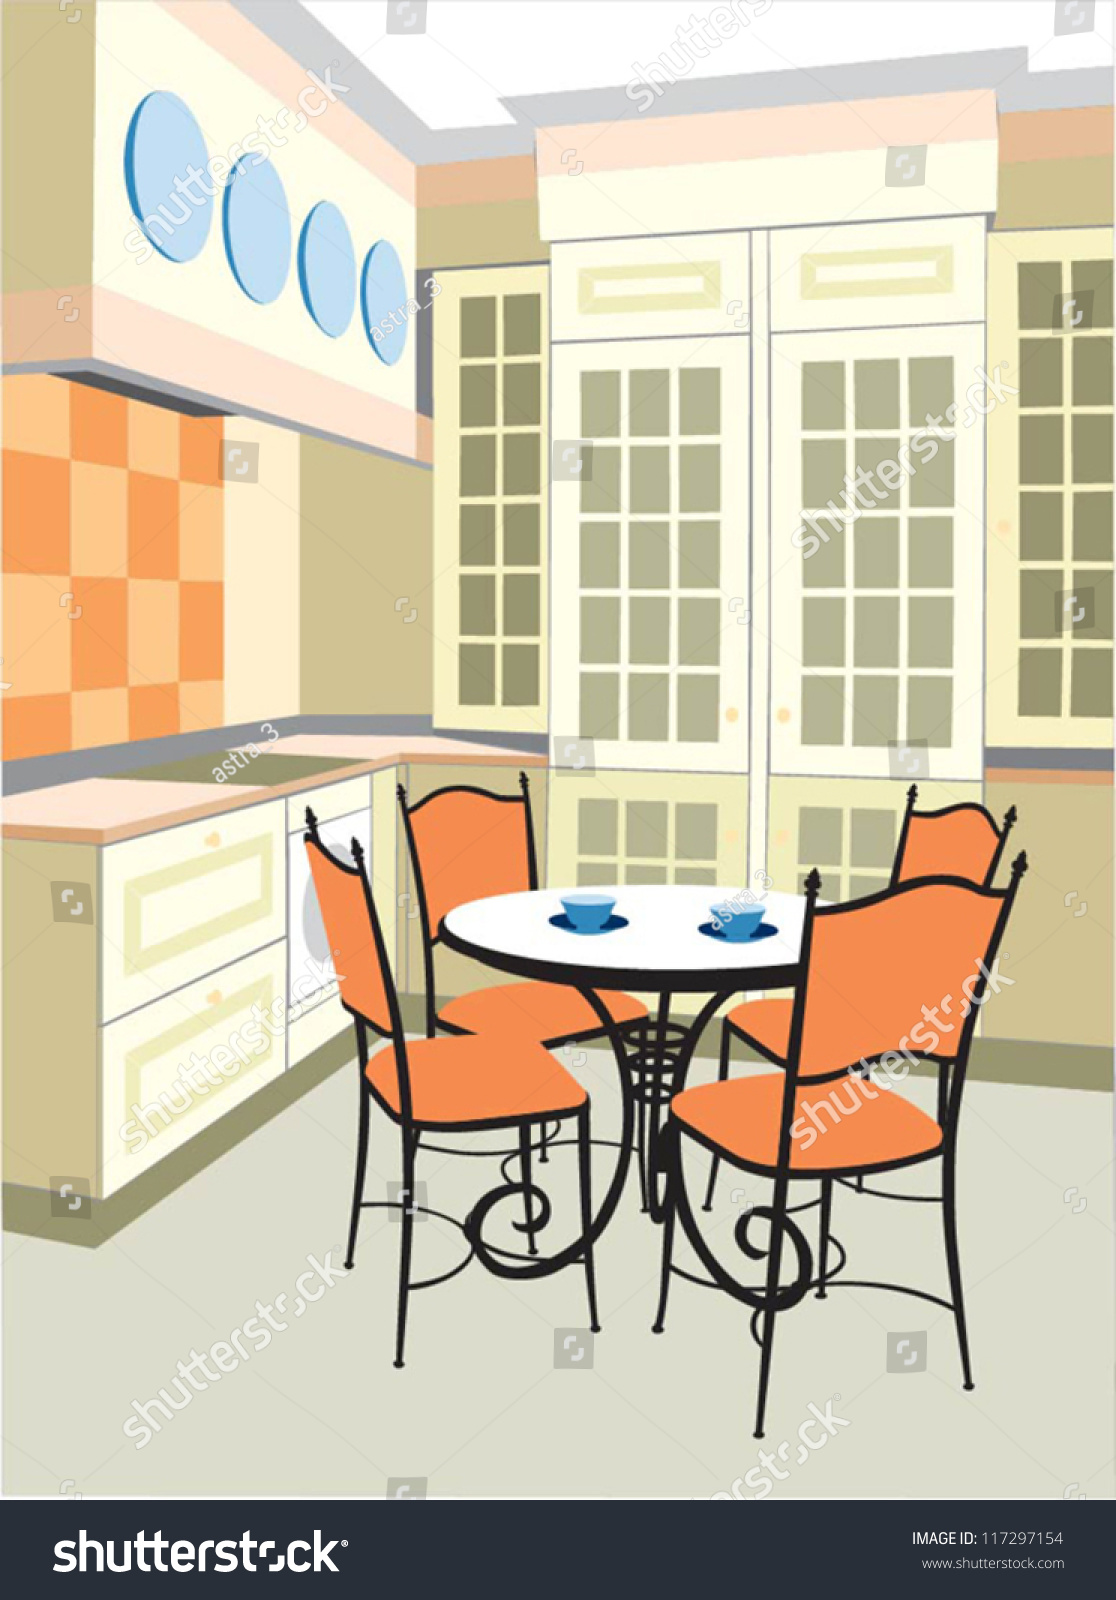 dining room clipart images - photo #37